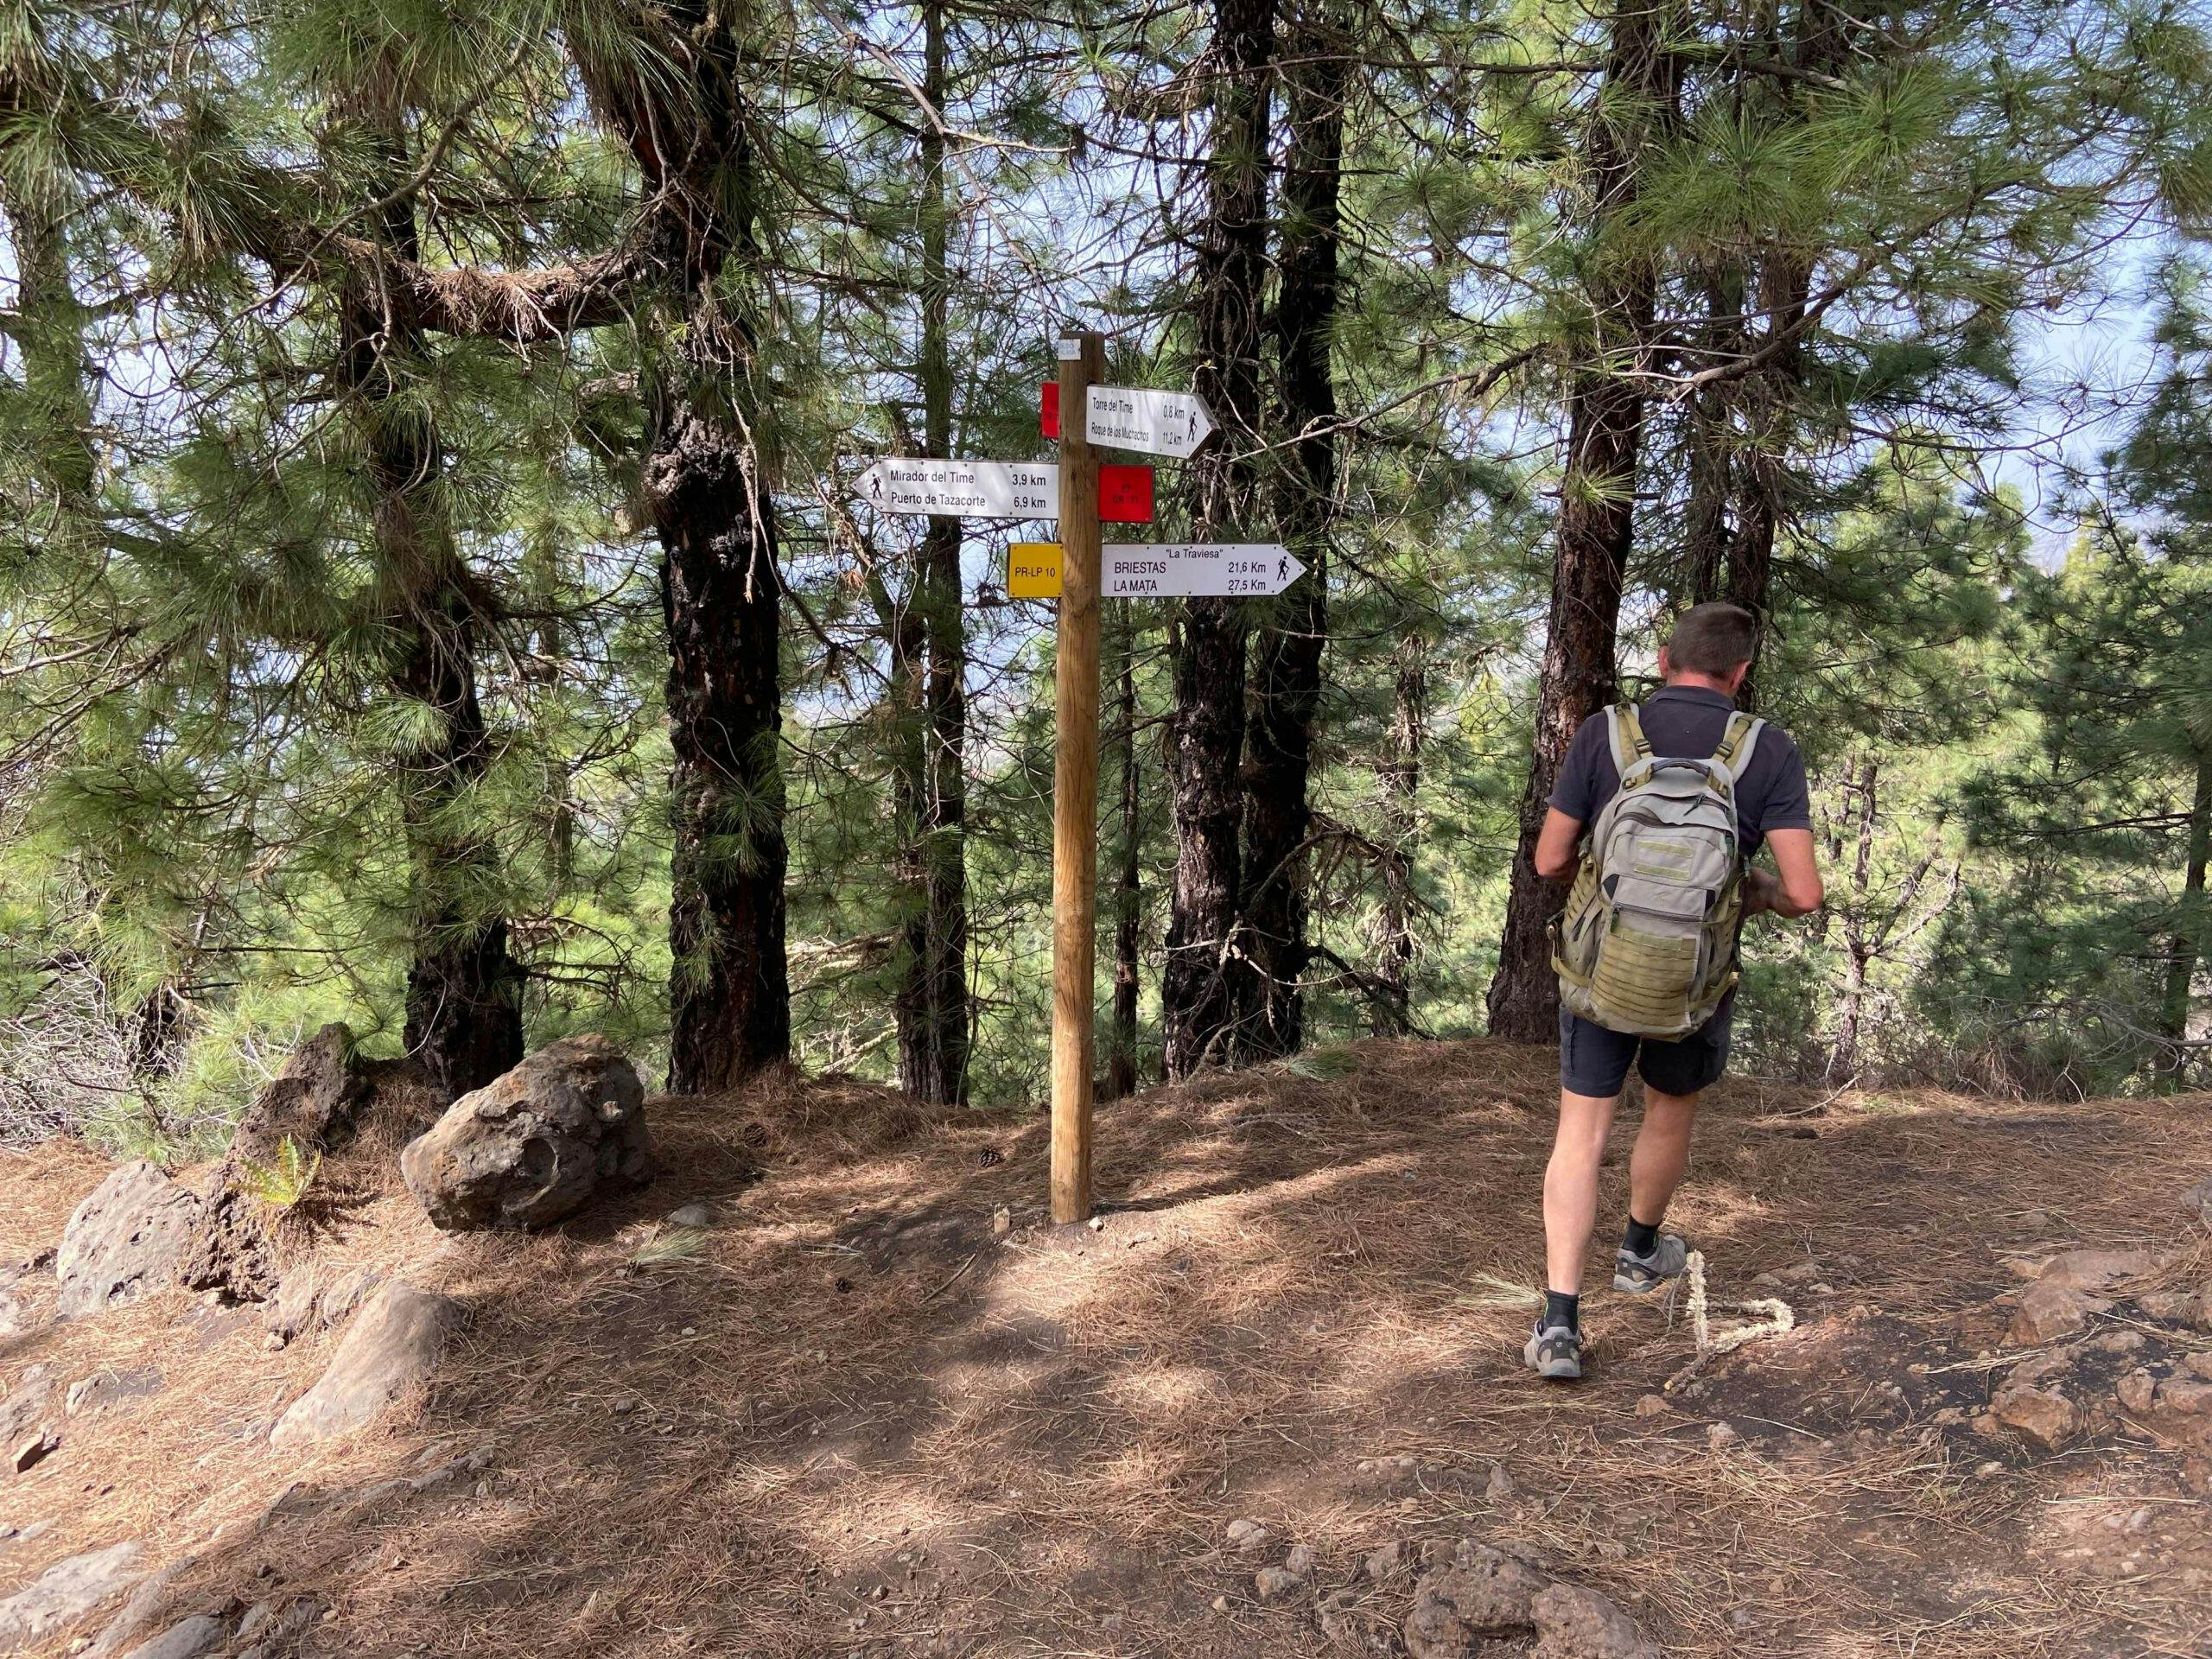 Hiking on well signposted trails